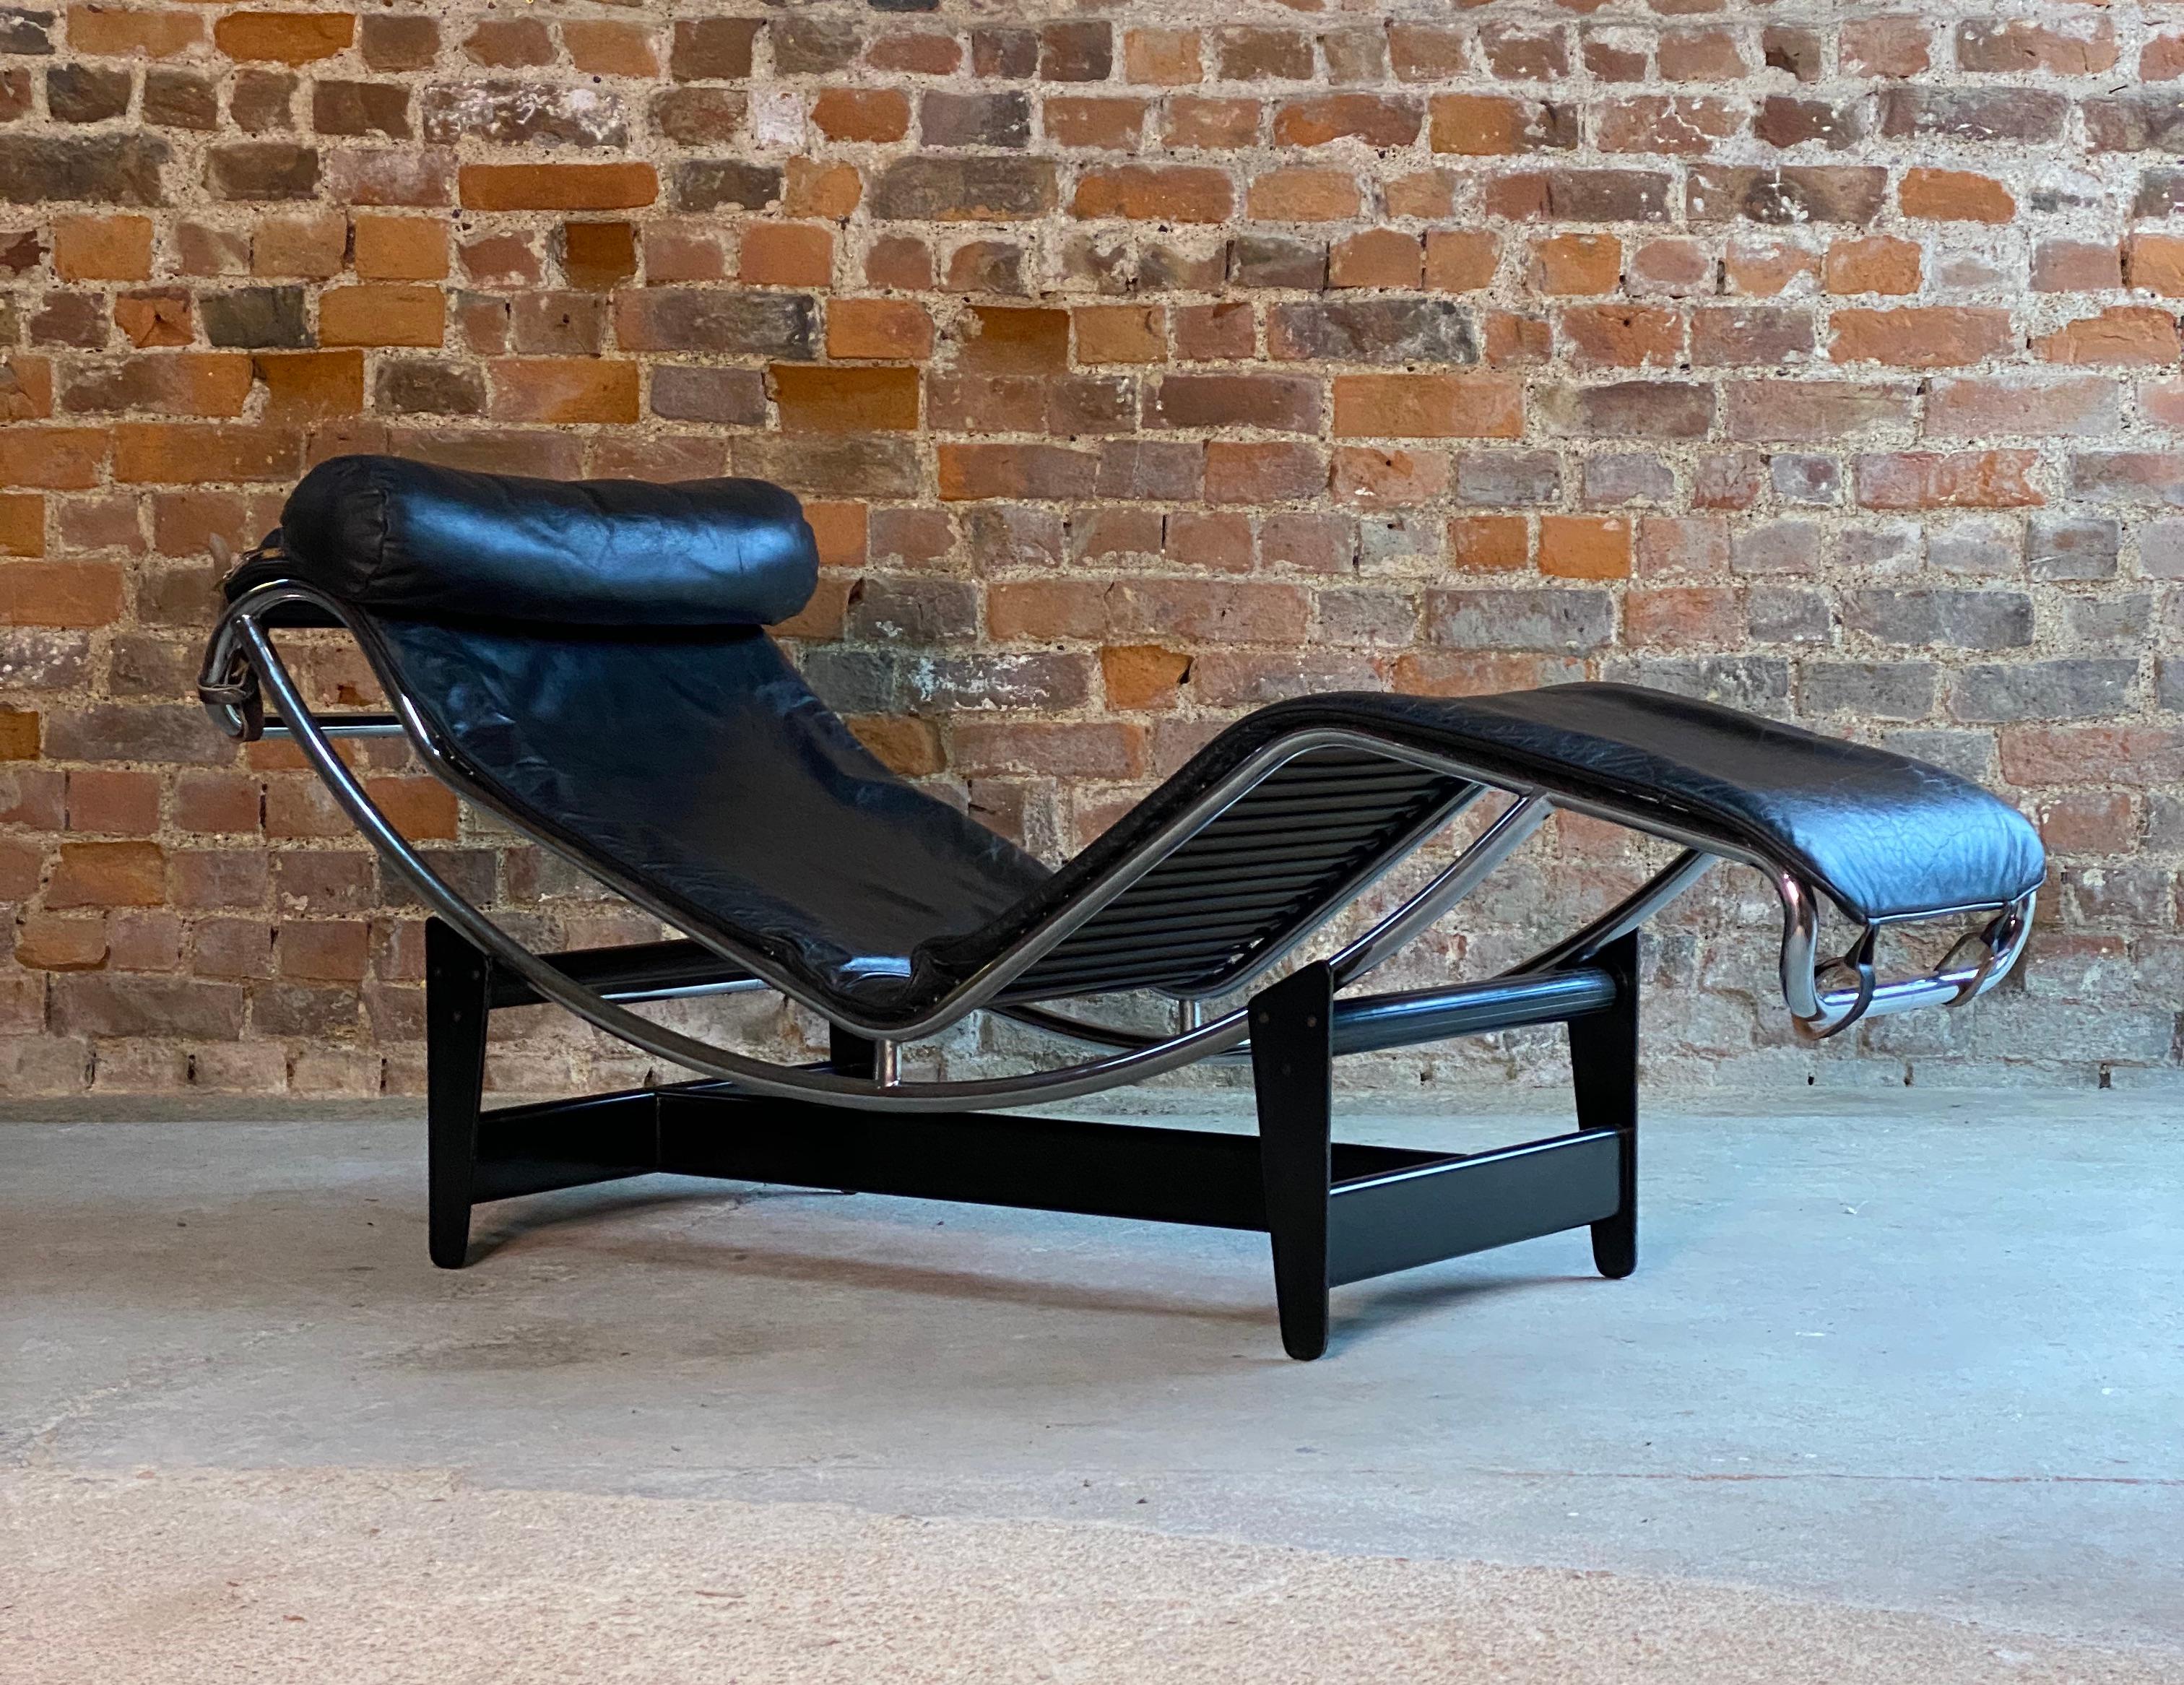 Original Le Corbusier LC4 chaise lounge made by Cassina, circa 1965

The definitive Le Corbusier, Pierre Jeanneret and Charlotte Perriand design LC4 chaise lounge designed in 1928 and produced by Cassina, circa 1965. The LC4 with original black